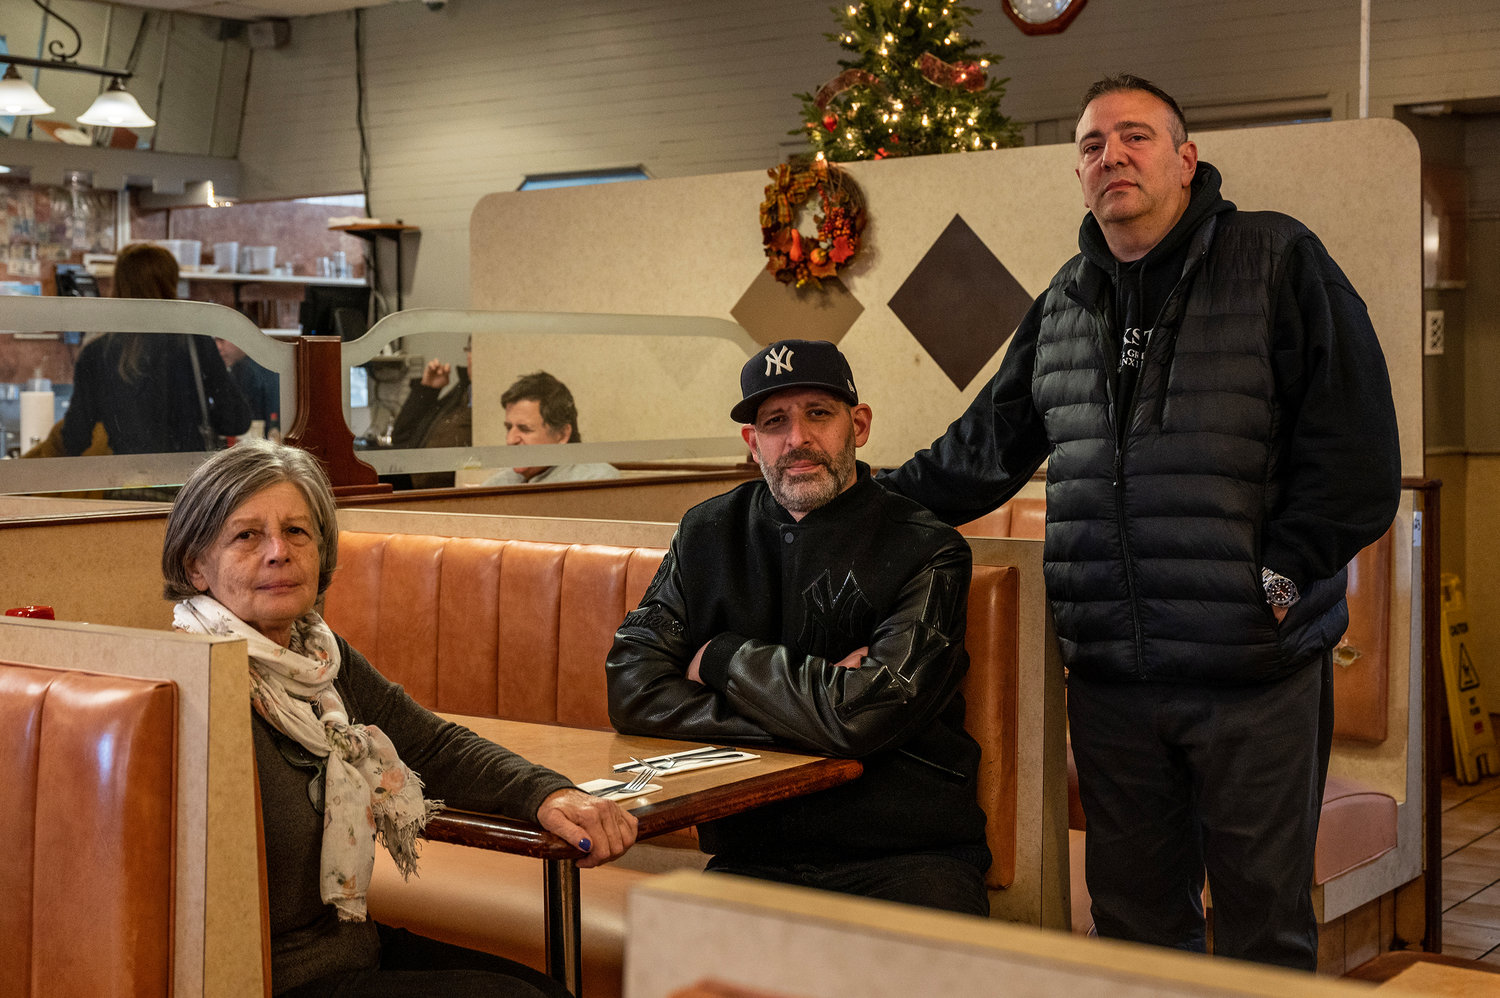 Owners Elizabeth Katechis, left, her son, Spiro Katechis, center, and nephew, Steve Catechis, right gathered at Blue Bay Restaurant on their last day in business after 48 years Nov. 28.